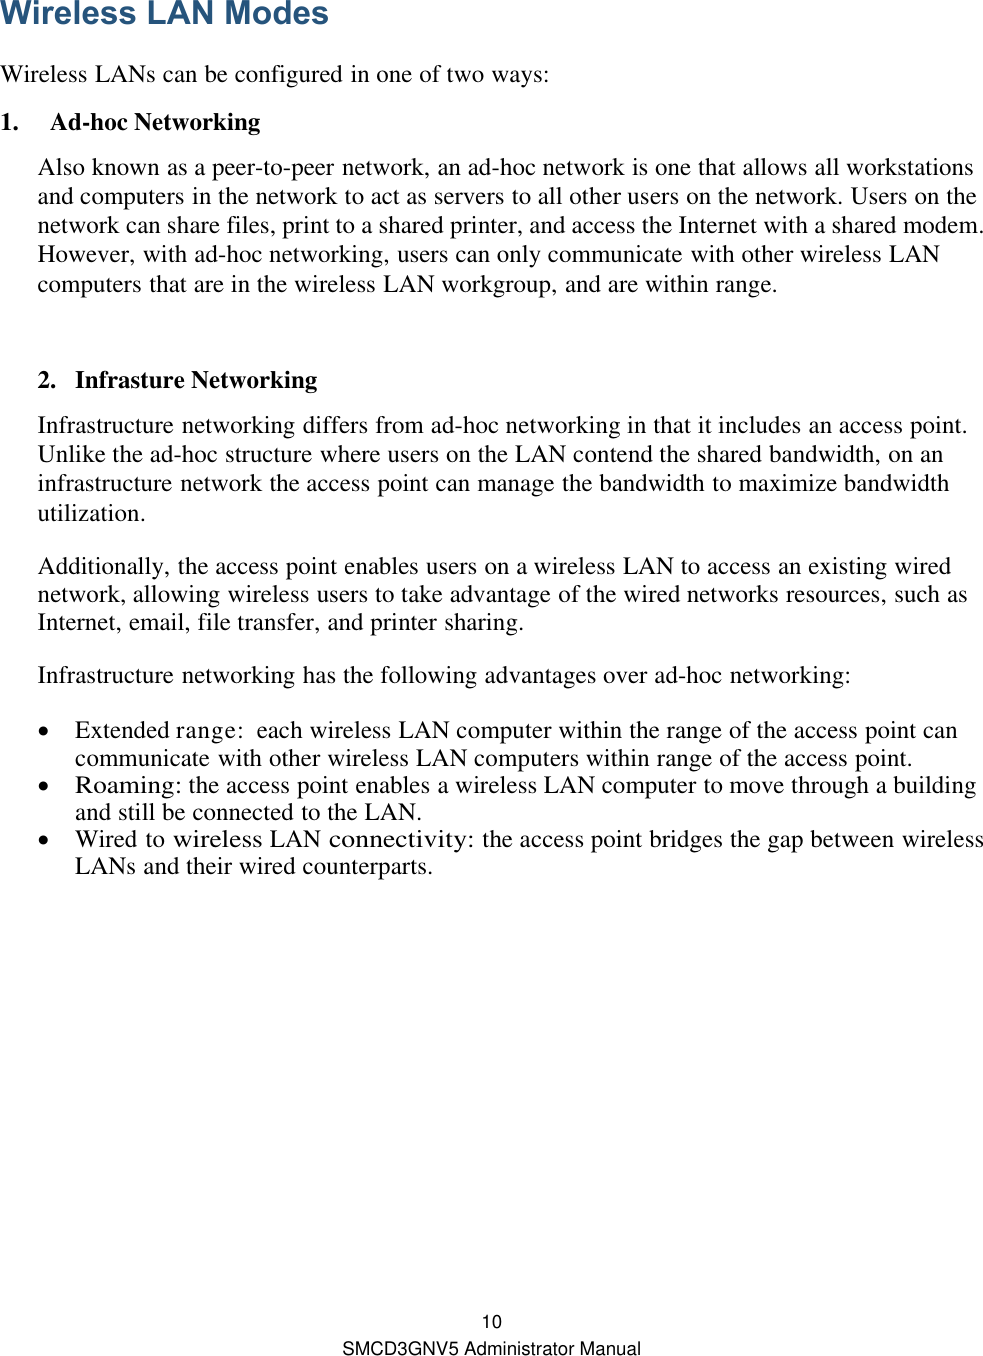  10 SMCD3GNV5 Administrator Manual Wireless LAN Modes   Wireless LANs can be configured in one of two ways: 1. Ad-hoc Networking Also known as a peer-to-peer network, an ad-hoc network is one that allows all workstations and computers in the network to act as servers to all other users on the network. Users on the network can share files, print to a shared printer, and access the Internet with a shared modem. However, with ad-hoc networking, users can only communicate with other wireless LAN computers that are in the wireless LAN workgroup, and are within range.  2. Infrasture Networking Infrastructure networking differs from ad-hoc networking in that it includes an access point. Unlike the ad-hoc structure where users on the LAN contend the shared bandwidth, on an infrastructure network the access point can manage the bandwidth to maximize bandwidth utilization. Additionally, the access point enables users on a wireless LAN to access an existing wired network, allowing wireless users to take advantage of the wired networks resources, such as Internet, email, file transfer, and printer sharing. Infrastructure networking has the following advantages over ad-hoc networking:  Extended range:  each wireless LAN computer within the range of the access point can communicate with other wireless LAN computers within range of the access point.  Roaming: the access point enables a wireless LAN computer to move through a building and still be connected to the LAN.  Wired to wireless LAN connectivity: the access point bridges the gap between wireless LANs and their wired counterparts.       